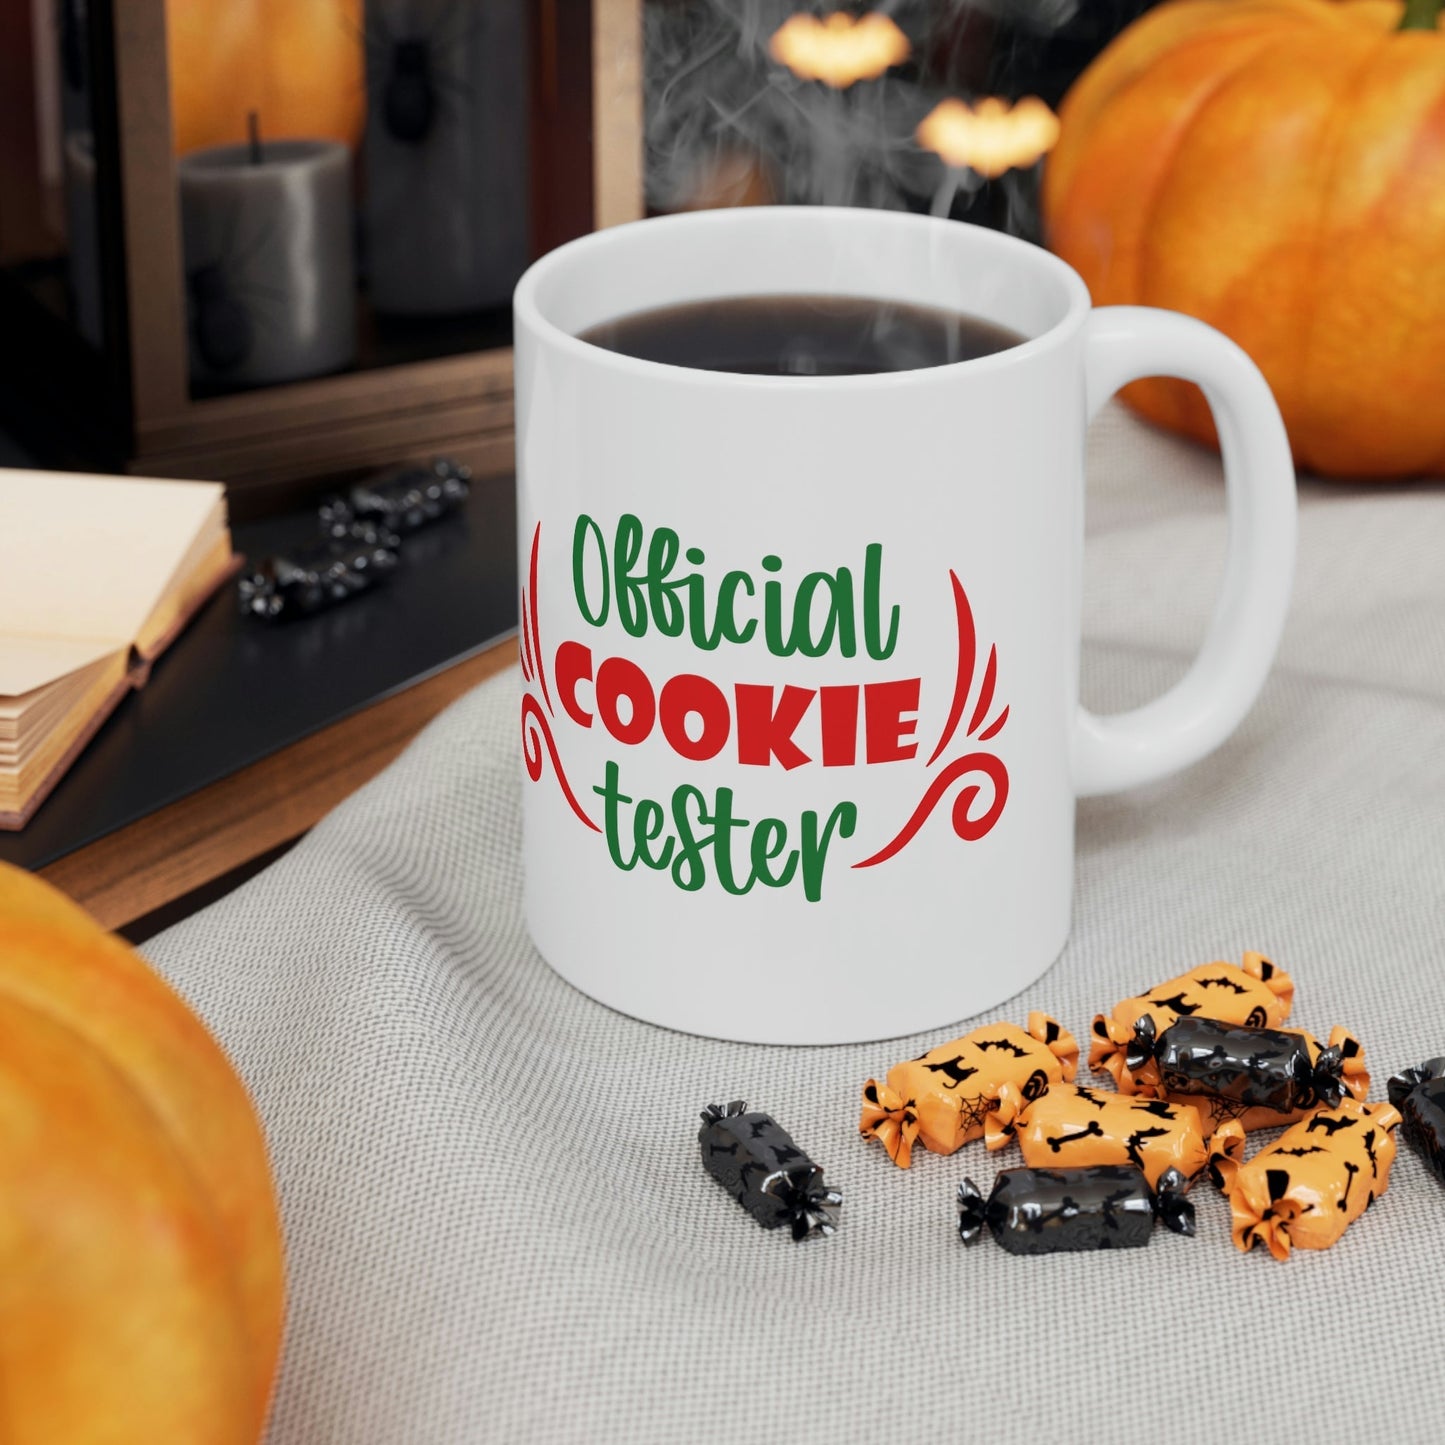 Official Cookies Tester Christmas Quote Wishes Ceramic Mug 11oz Ichaku [Perfect Gifts Selection]